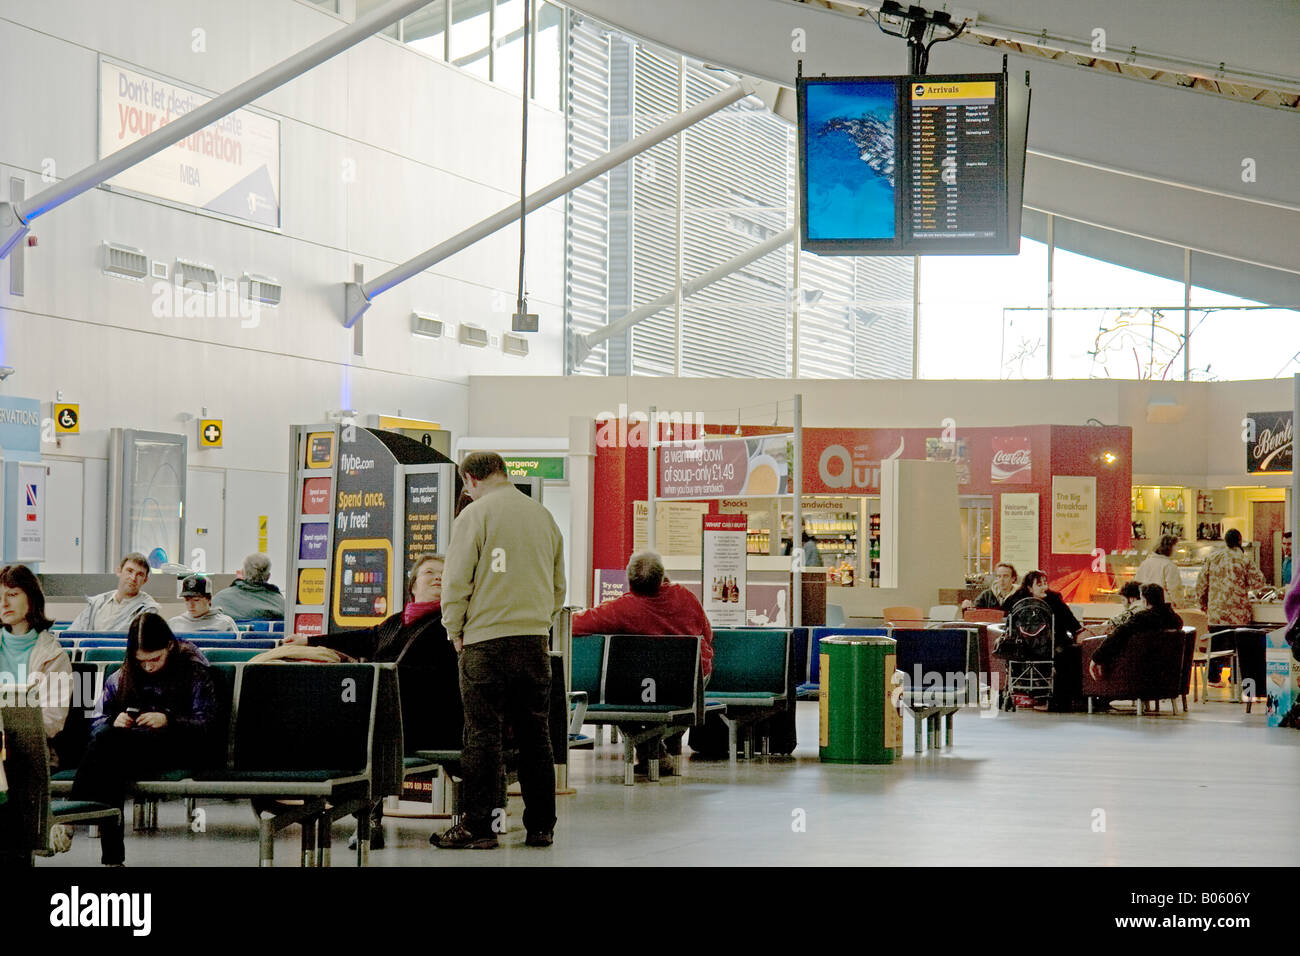 Interior view of Southampton regional airport main building including passenger seating shops arrival board and advertising Stock Photo